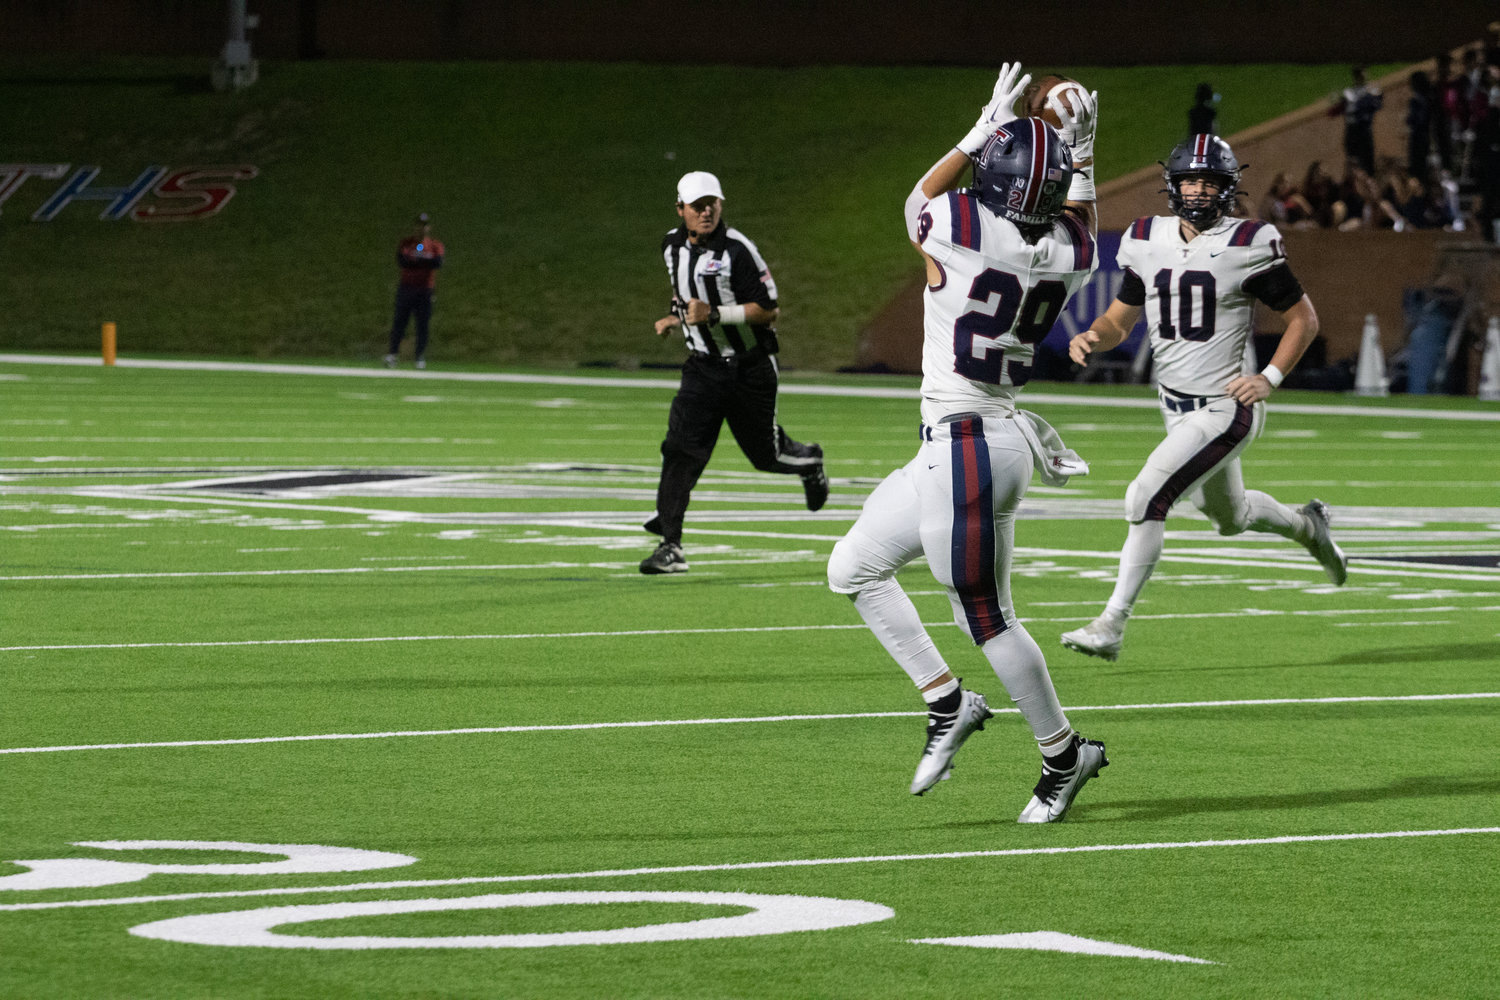 Tompkins' Dylan Rodriguez catches a pass during Friday's game between Tompkins and Paetow at Rhodes Stadium.